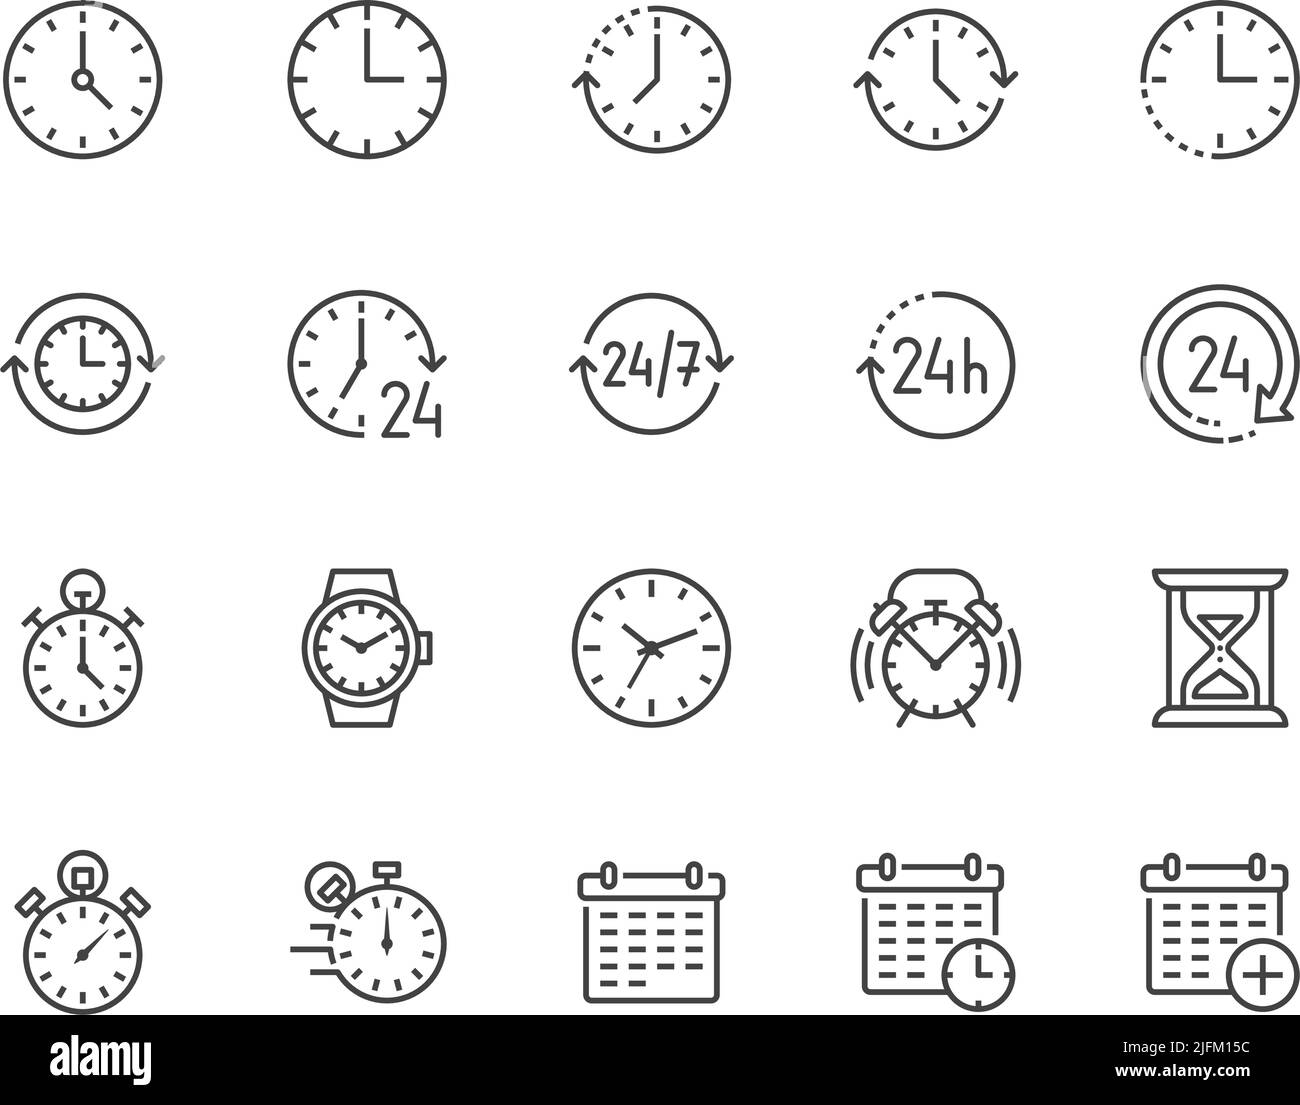 Time flat line icons set. Alarm clock, stopwatch, timer, sand glass, day and night, calendar vector illustrations. Thin signs for productivity Stock Vector